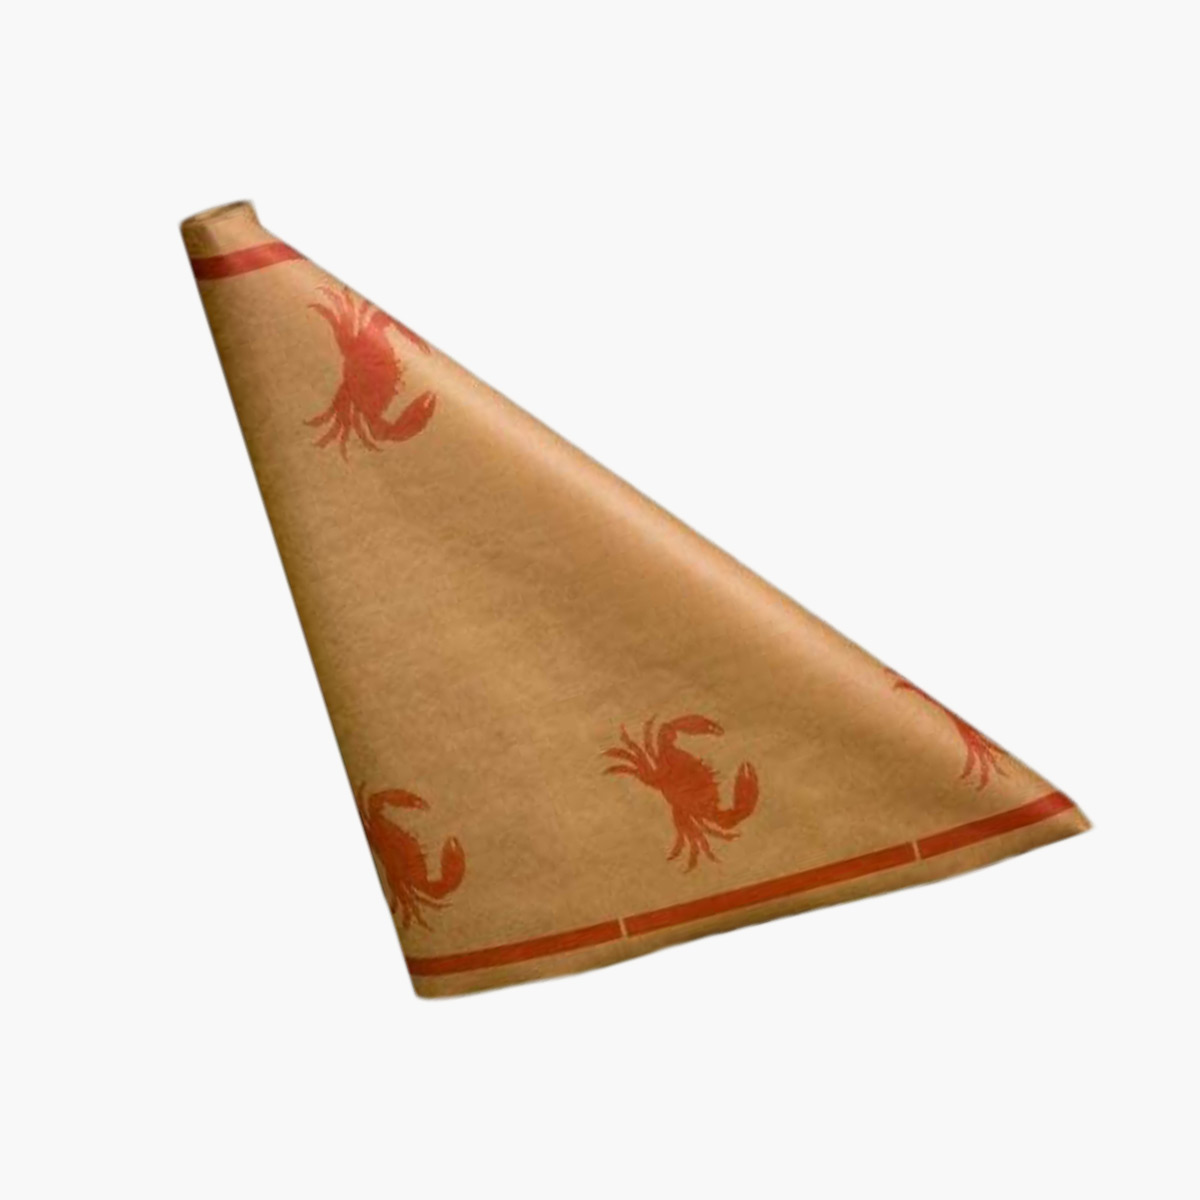 A 300-ft roll of crab table cover.